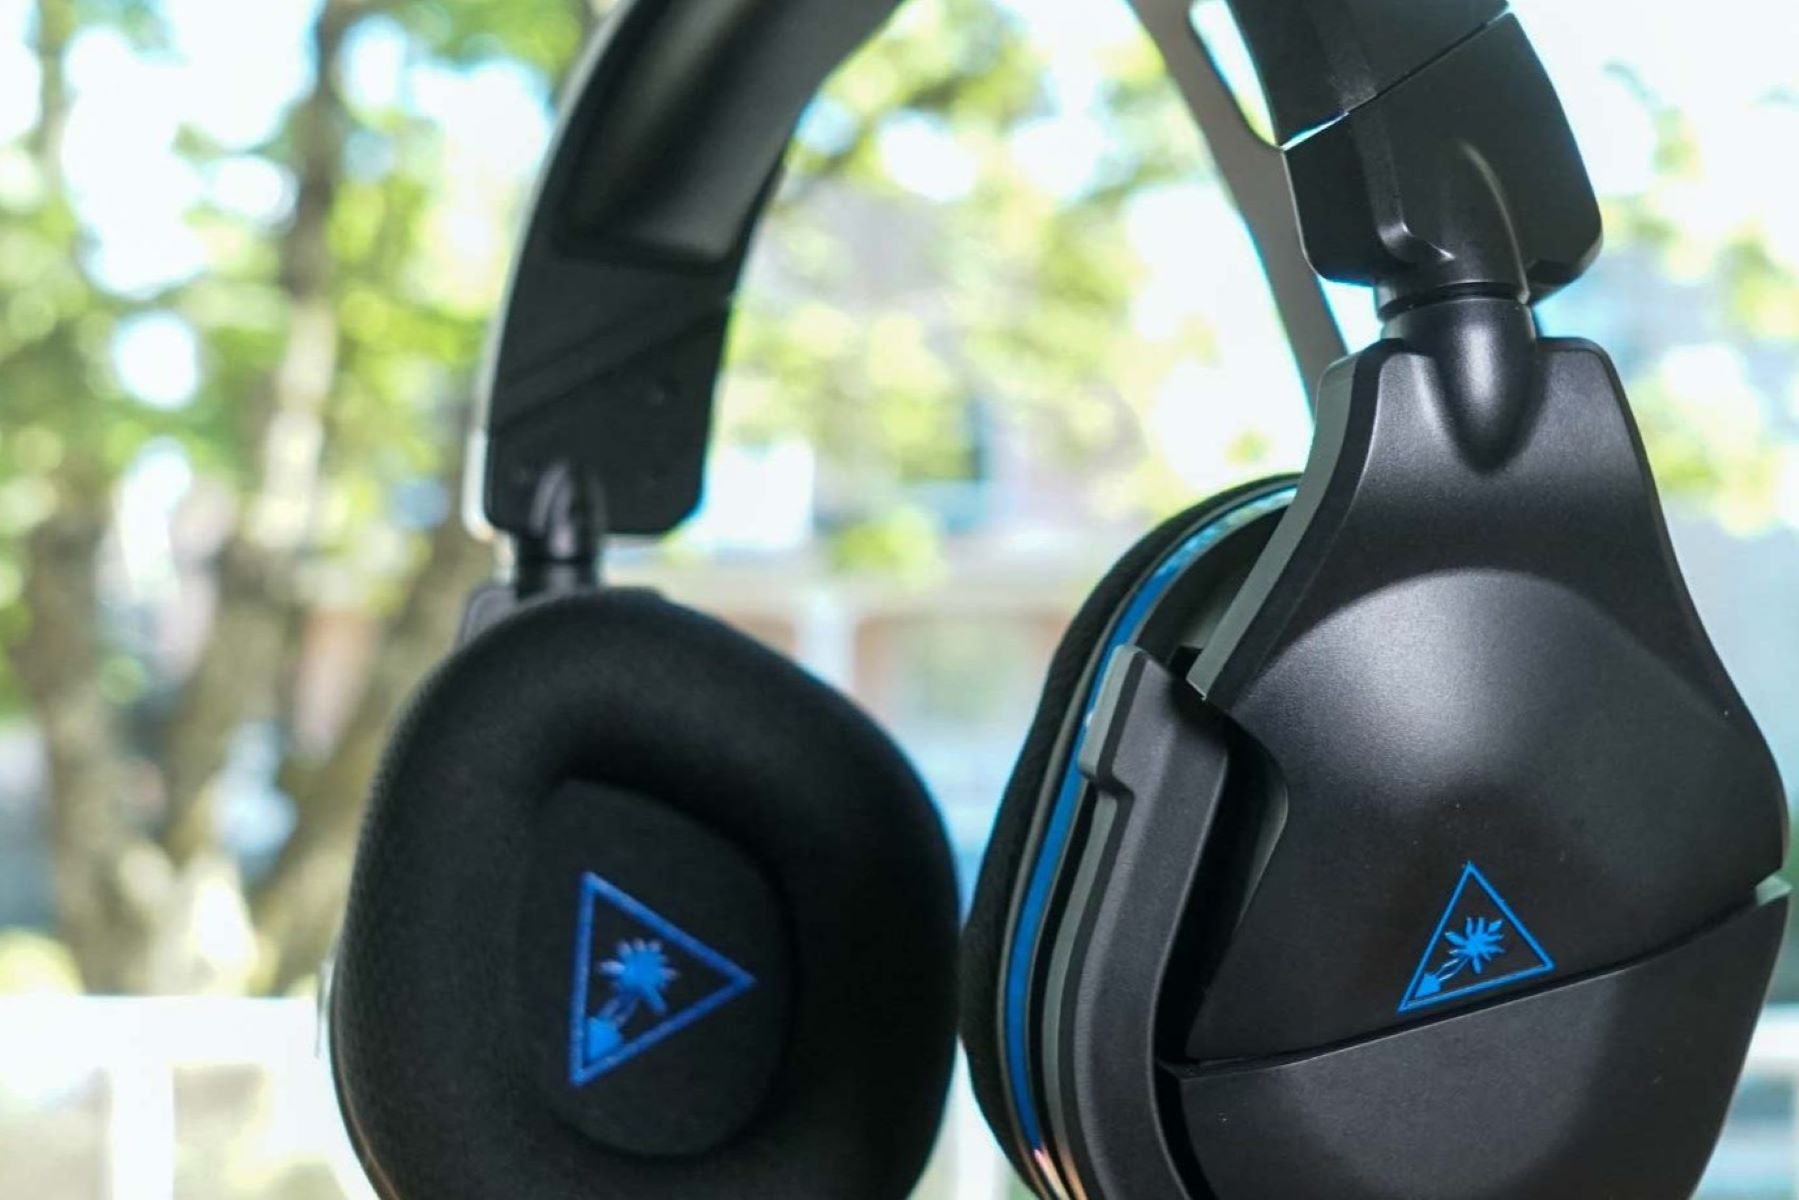 PC Audio Bliss: Connecting Your Turtle Beach Headset